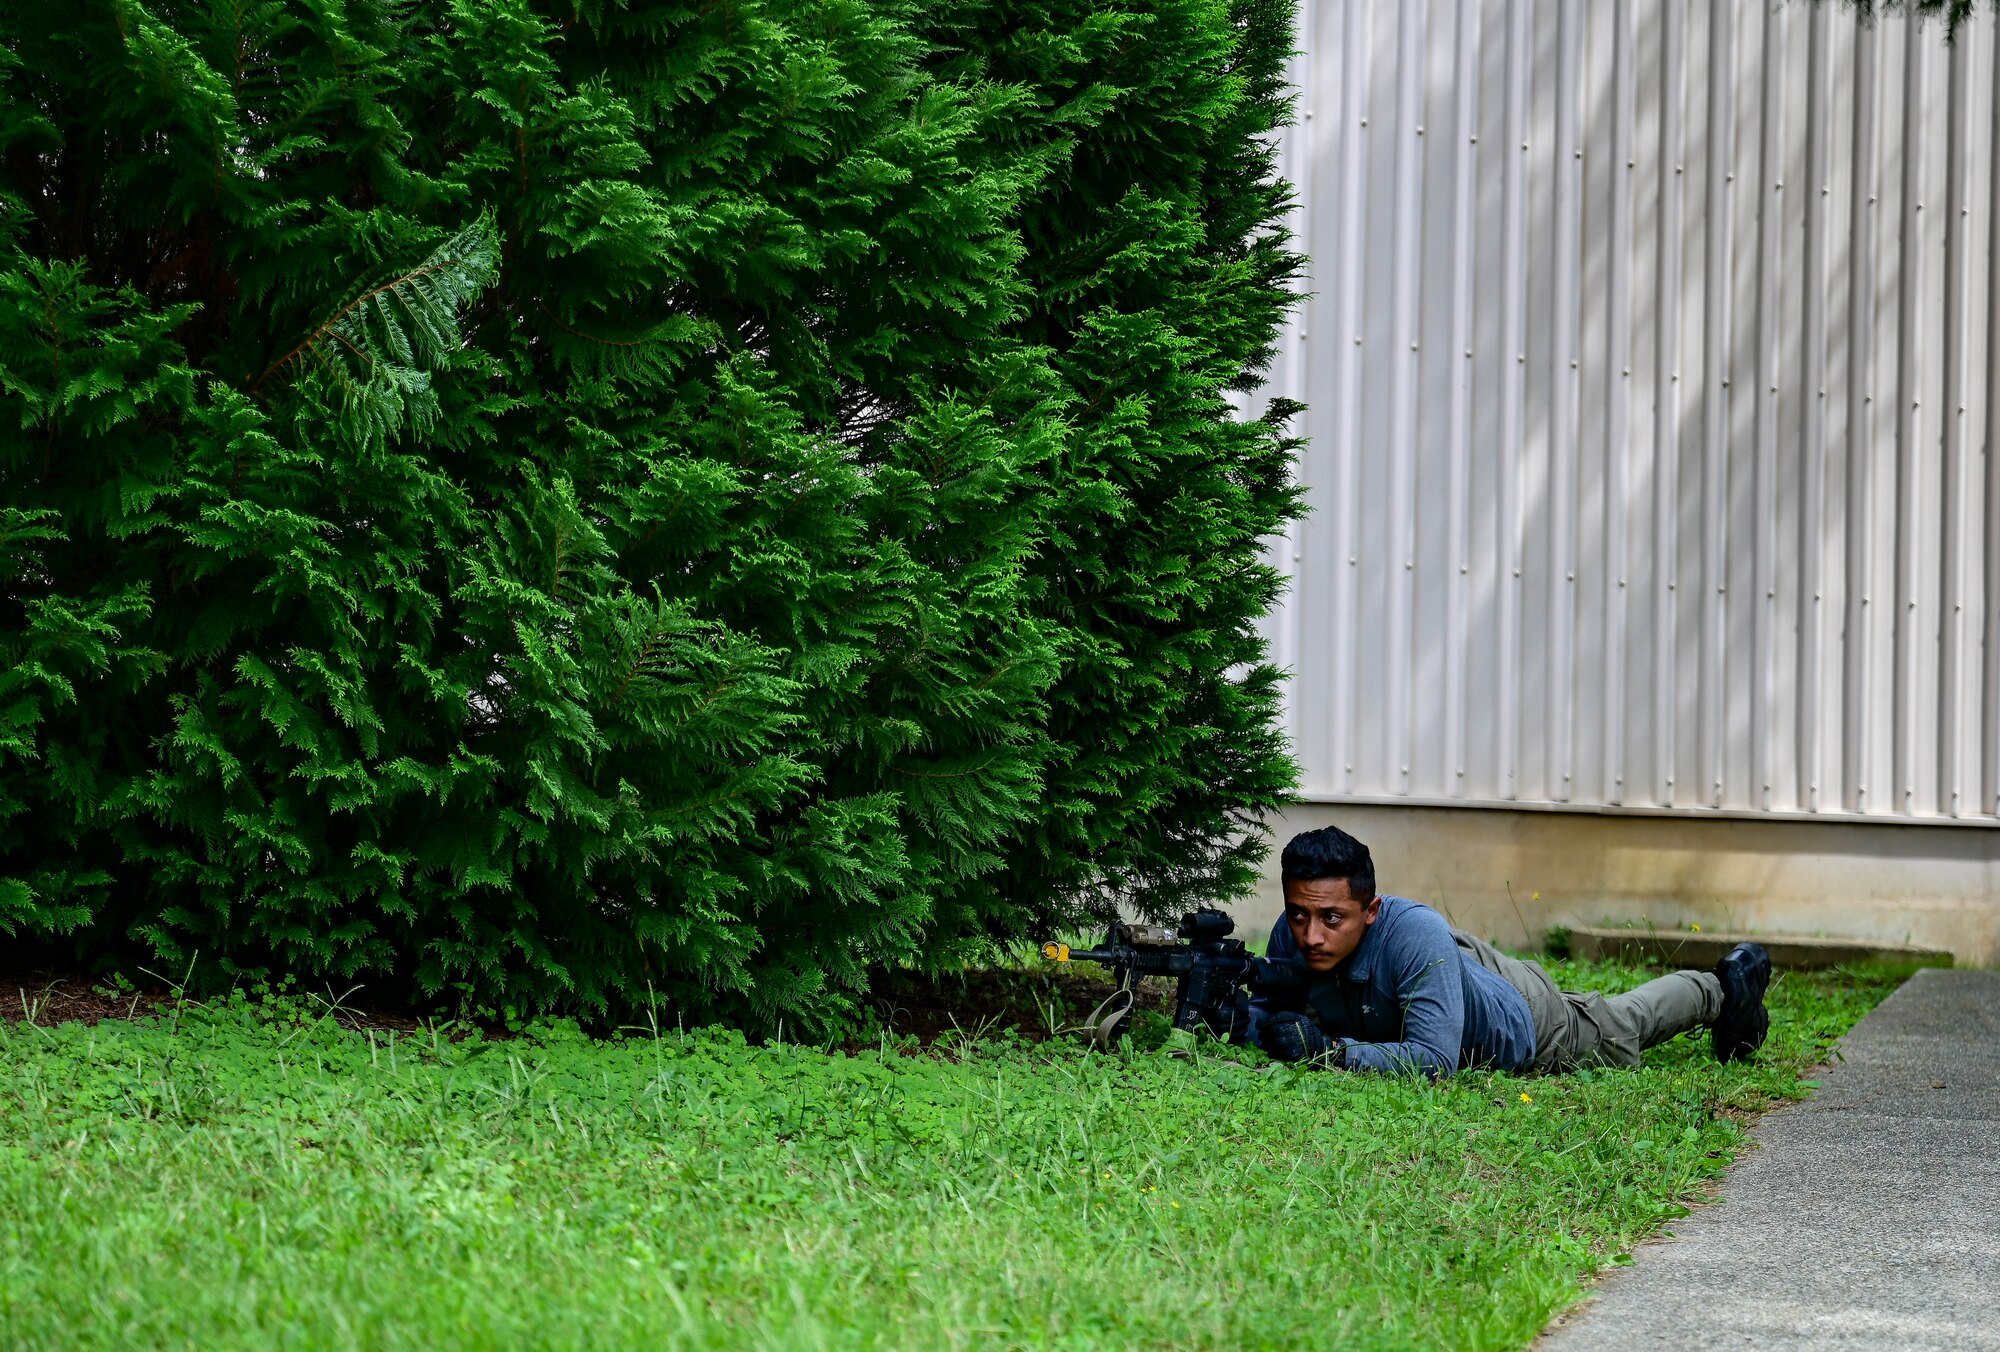 Man lying in grass with weapon.